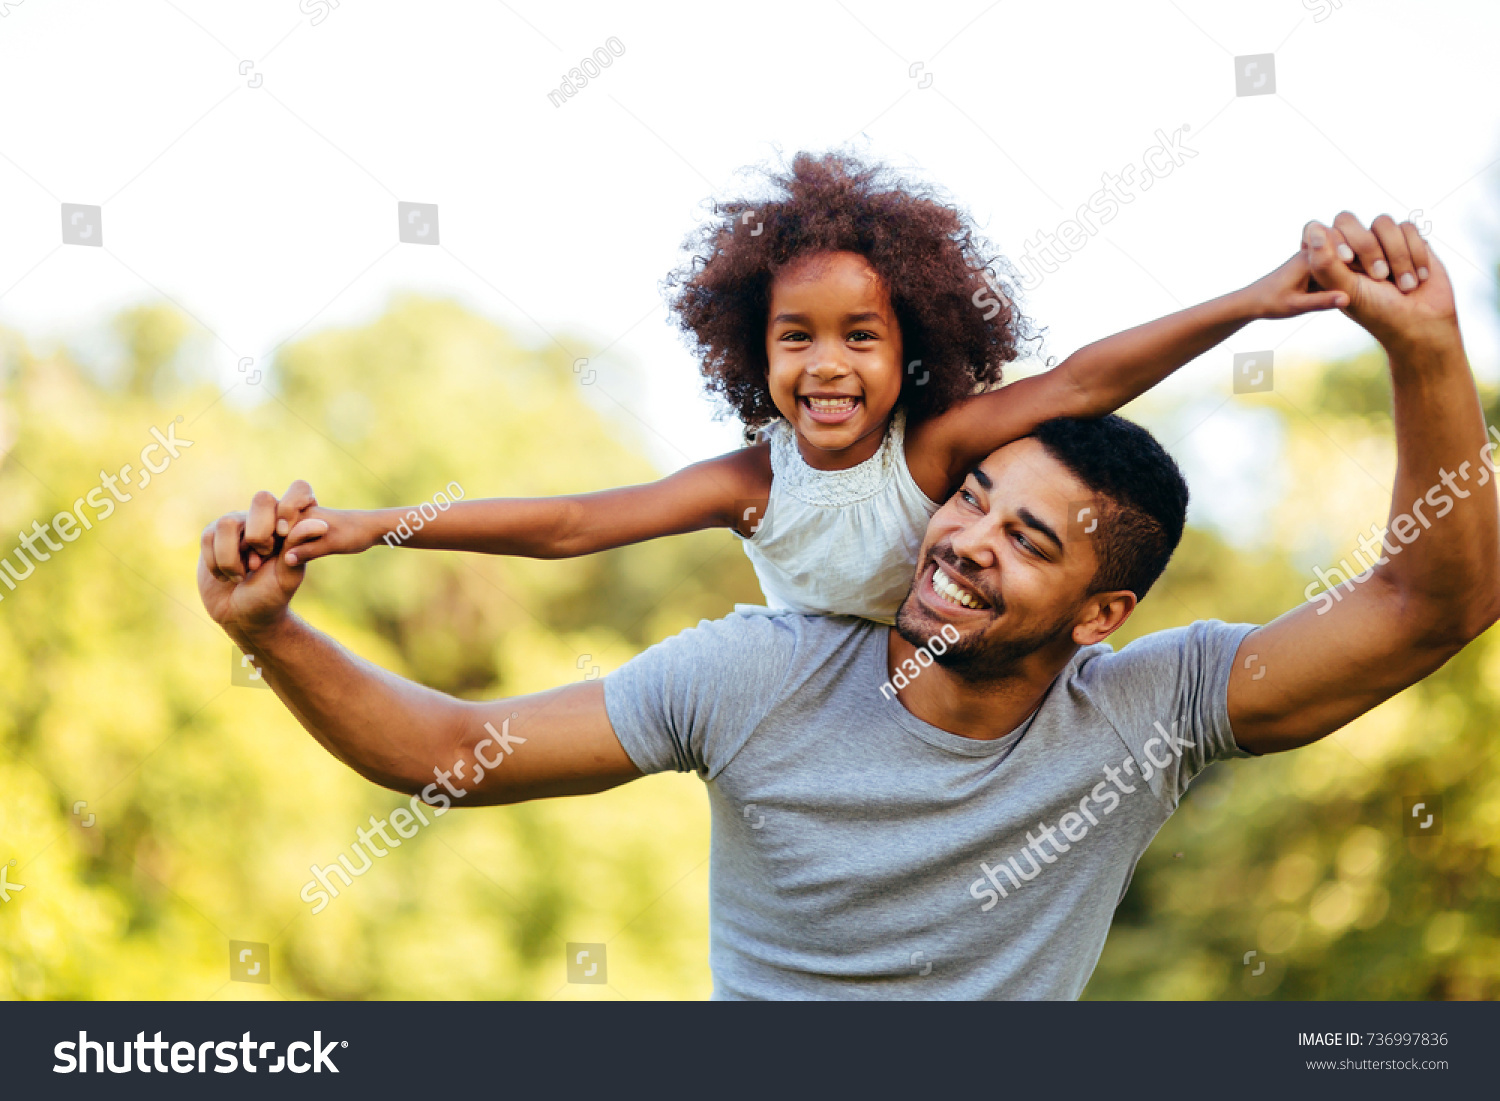 Portrait of young father carrying his daughter on his back #736997836